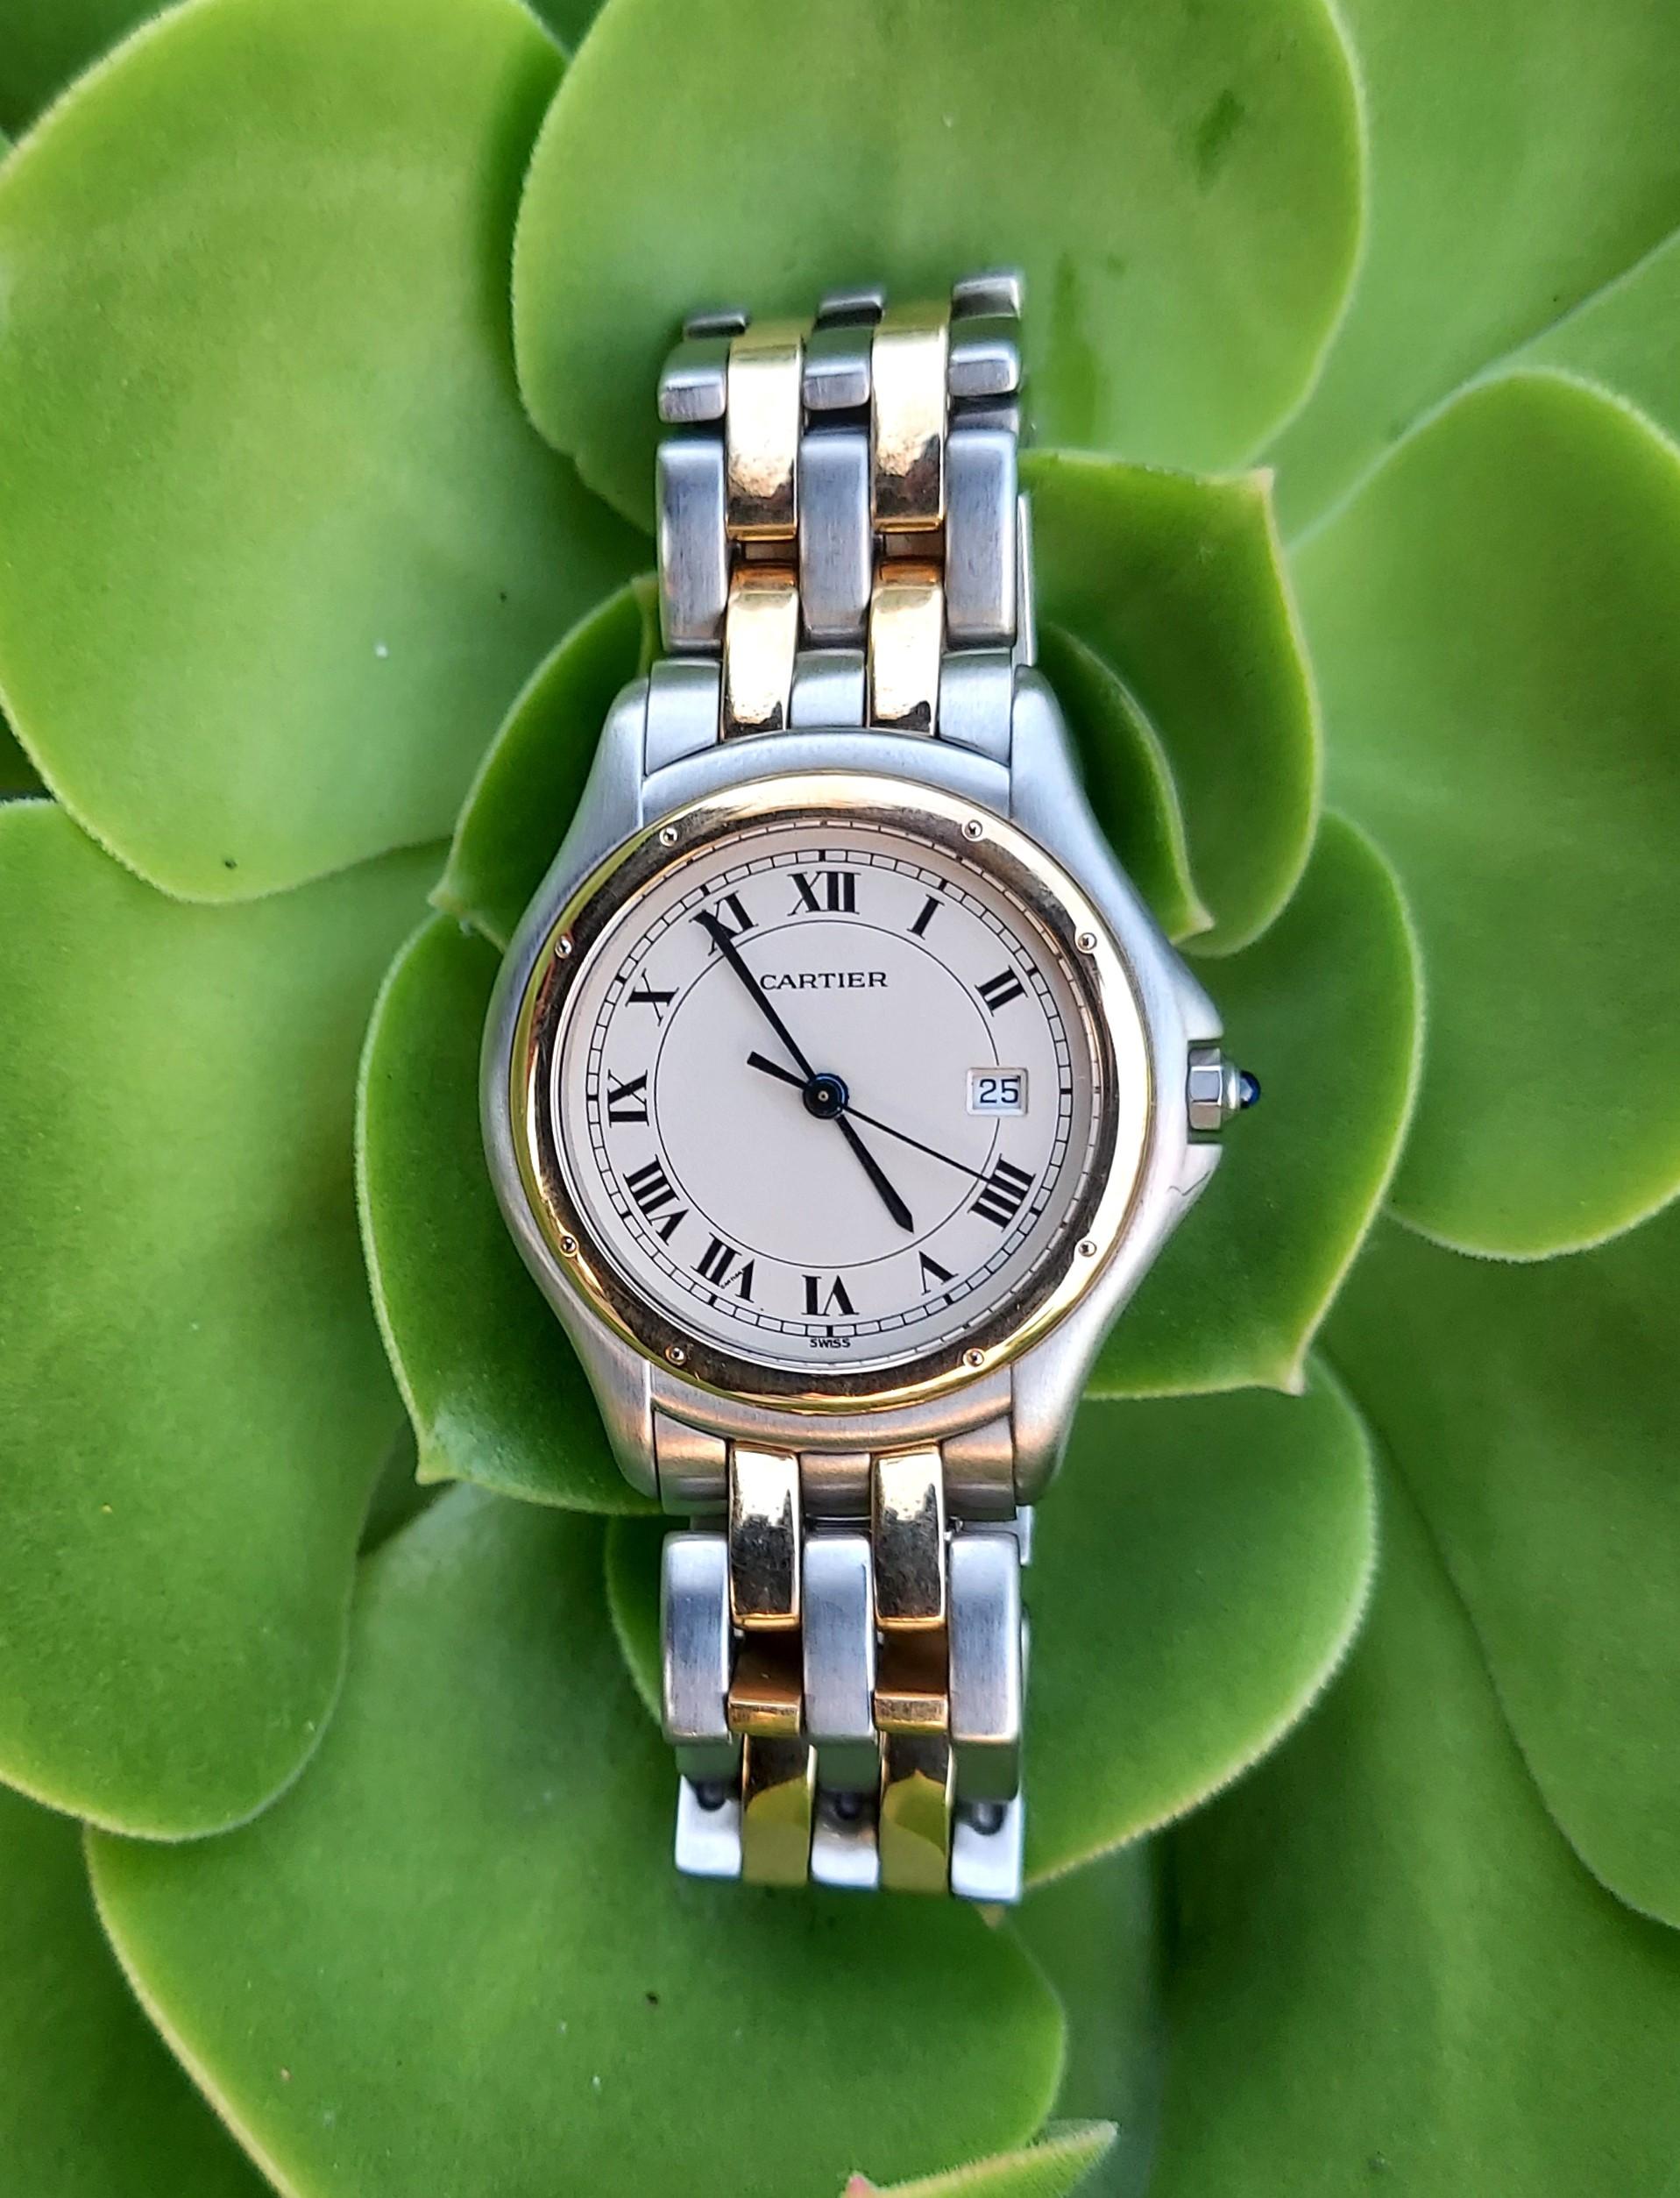 This Cartier Cougar watch is a testament to timeless elegance and precision with its quartz movement and classic design. The watch is in very good condition, indicating minimal signs of wear. It's a versatile piece suited for both men and women,